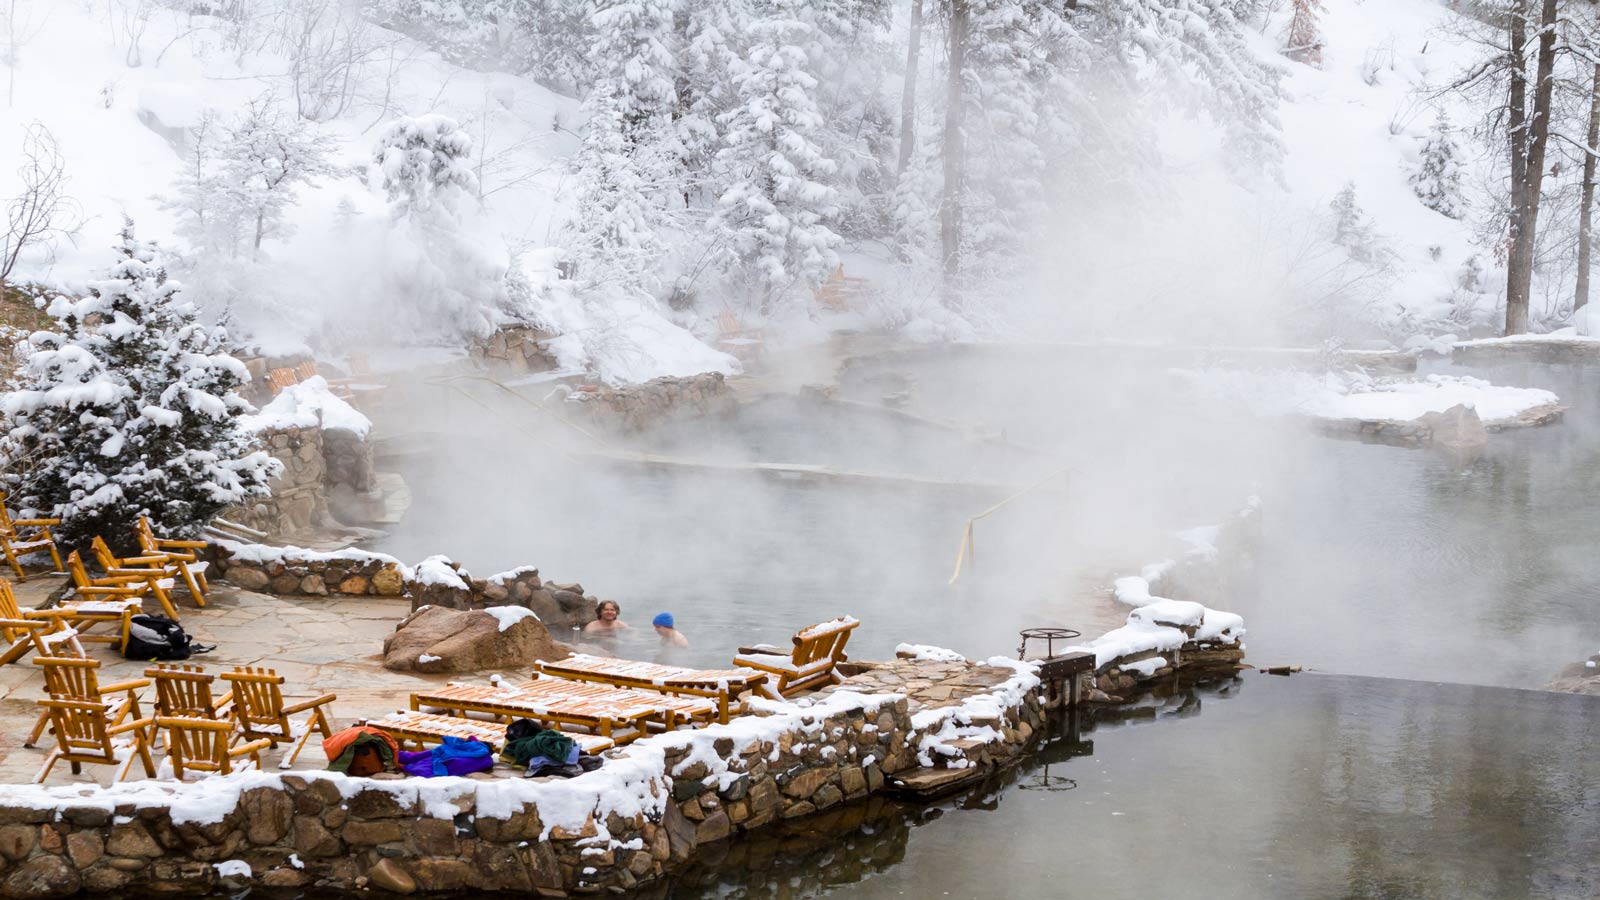 <p>After your time in the snow, why not warm up at one of Colorado’s fantastic natural <a href="https://thehappinessfxn.com/5-best-hot-springs-to-visit-in-colorado-year-round/">hot springs</a>? These mineral-rich, bubbling pools are dotted all over the state, and they’re definitely a treat.</p><p><a href="https://thehappinessfxn.com/things-to-do-in-glenwood-springs-colorado/">Glenwood Springs</a> might be the most popular Colorado hot spring. There are three different hot springs in this mountain town – <a href="https://www.hotspringspool.com/" rel="nofollow noopener">Glenwood Hot Springs Resort</a>, <a href="https://www.ironmountainhotsprings.com/" rel="nofollow noopener">Iron Mountain Hot Springs</a>, and <a href="https://yampahspa.com/" rel="nofollow noopener">Yampah Spa Valley Caves</a> – all offering something a little different.</p><p>Then, there’s the town of Pagosa Springs, home to <a href="https://www.pagosahotsprings.com/" rel="nofollow noopener">The Springs Resort & Spa</a>. This spectacular resort is home to the world’s deepest geothermal hot spring, over 1,000 feet deep!</p><p>And last but certainly not least, we can’t forget to mention <a href="https://strawberryhotsprings.com/" rel="nofollow noopener">Strawberry Park Hot Springs</a> in Steamboat Springs. While most hot springs in Colorado funnel the natural hot spring water into an artificial pool, that’s not what’s happening at Strawberry Park Hot Springs. Instead, you can soak in five natural pools for a more down-to-earth experience.</p>